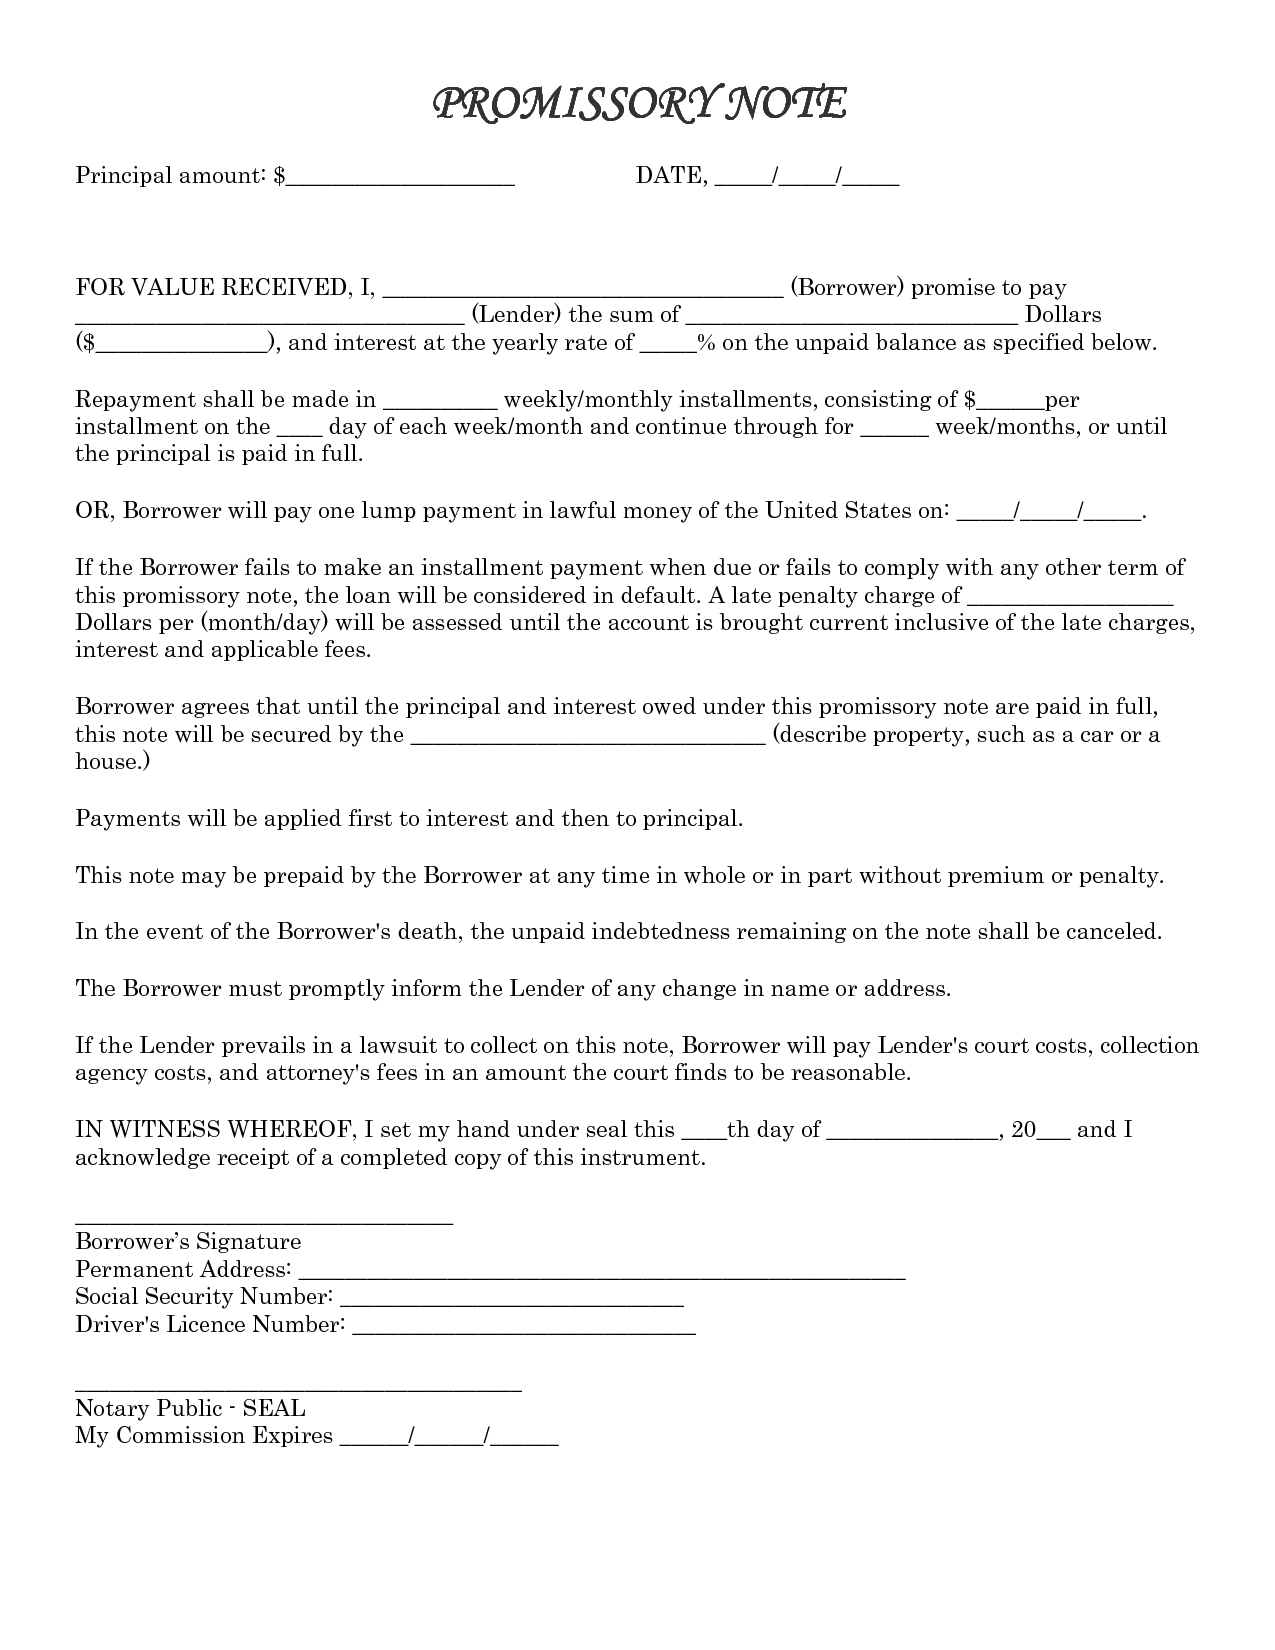 promissory-note-example-free-printable-documents